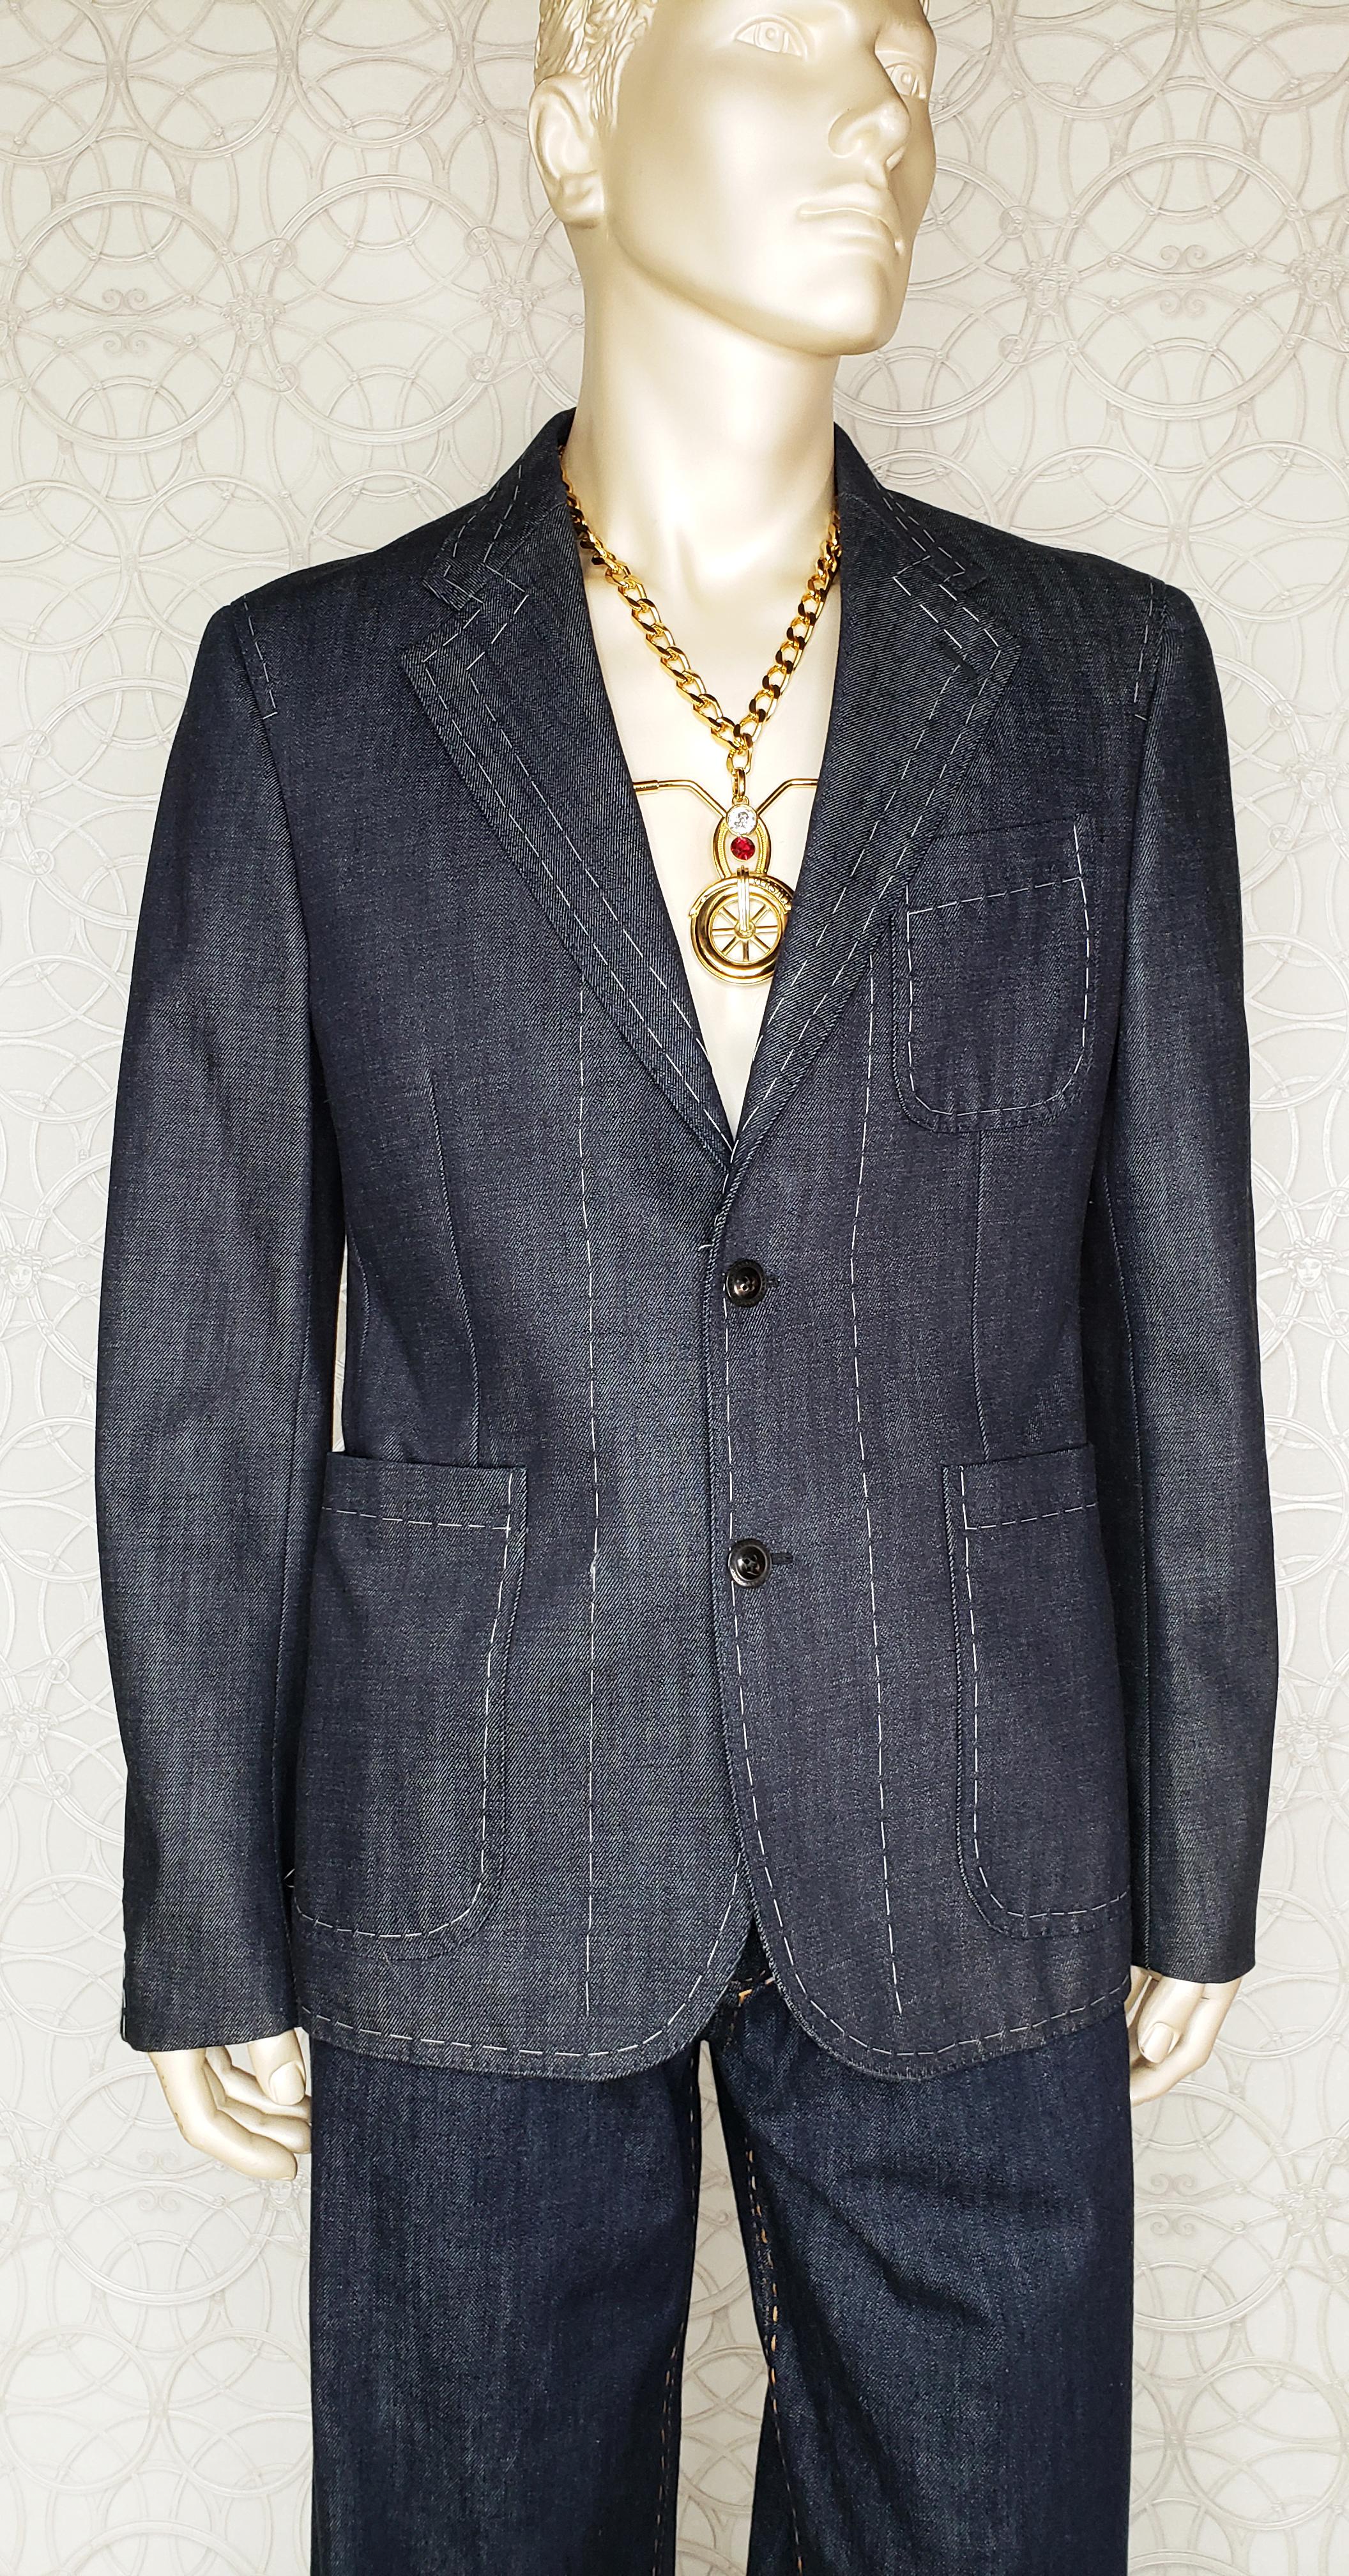 F/W 2015 look #30 NEW VERSACE JEANS SUIT For Sale 4